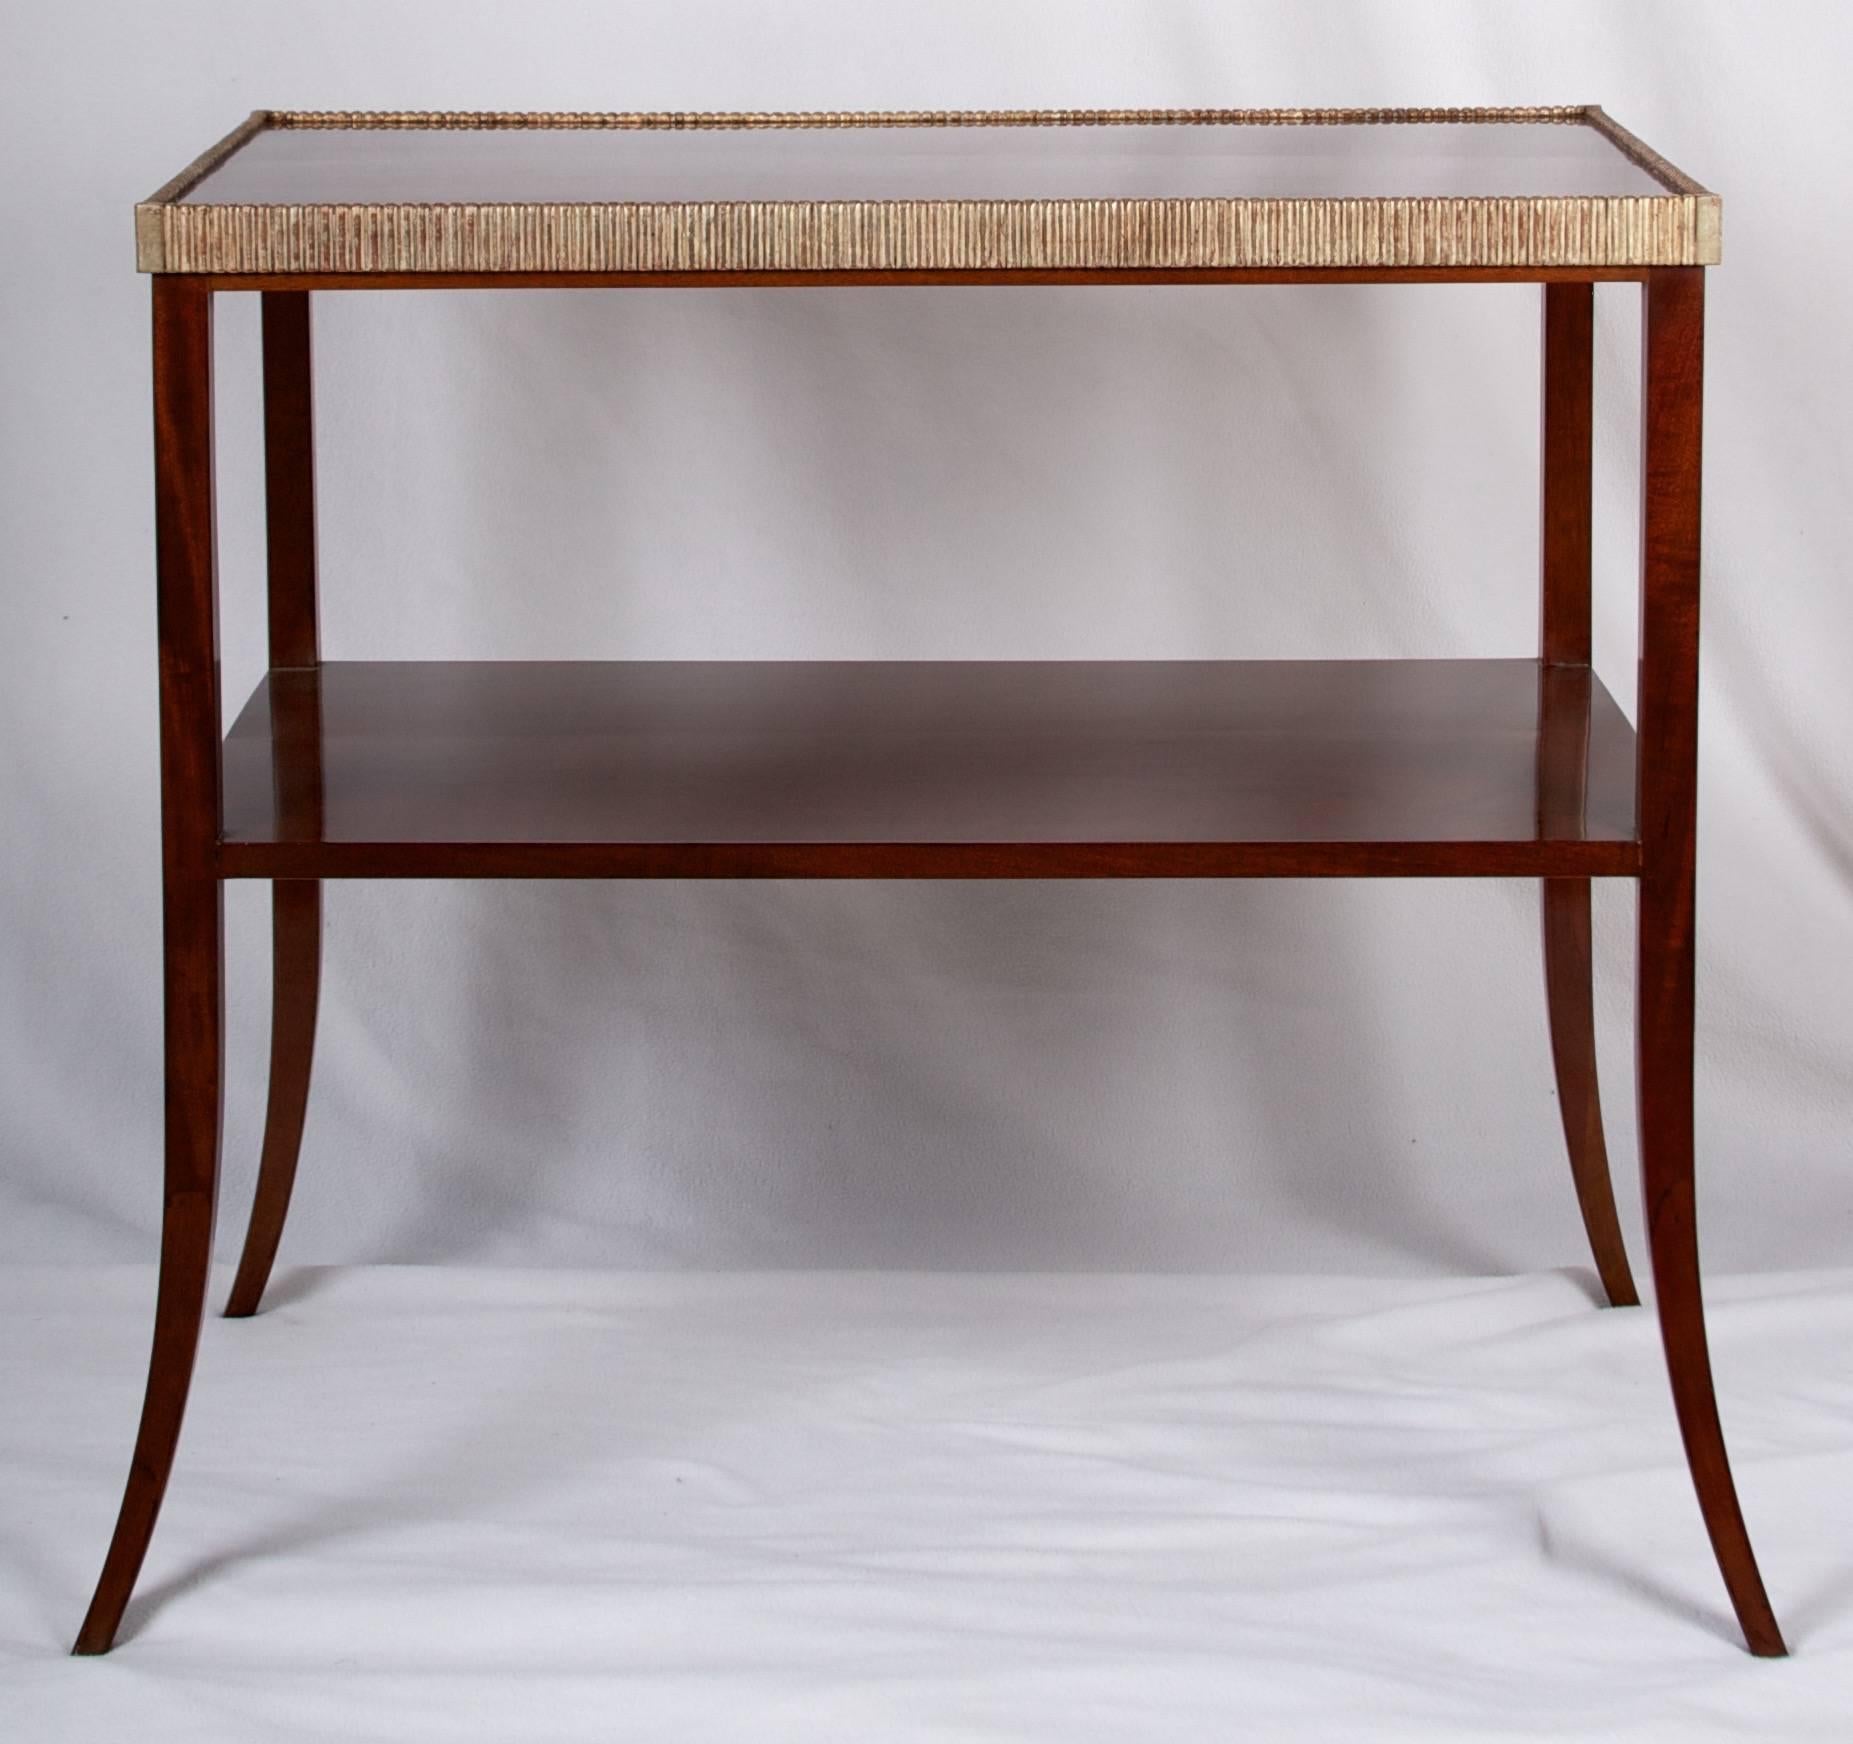 A fine mahogany side table with delicate but strong saber legs, a shelf and
wonderful gilded reed detail around the top. This table makes a wonderful side table
or bedside table or small console table.